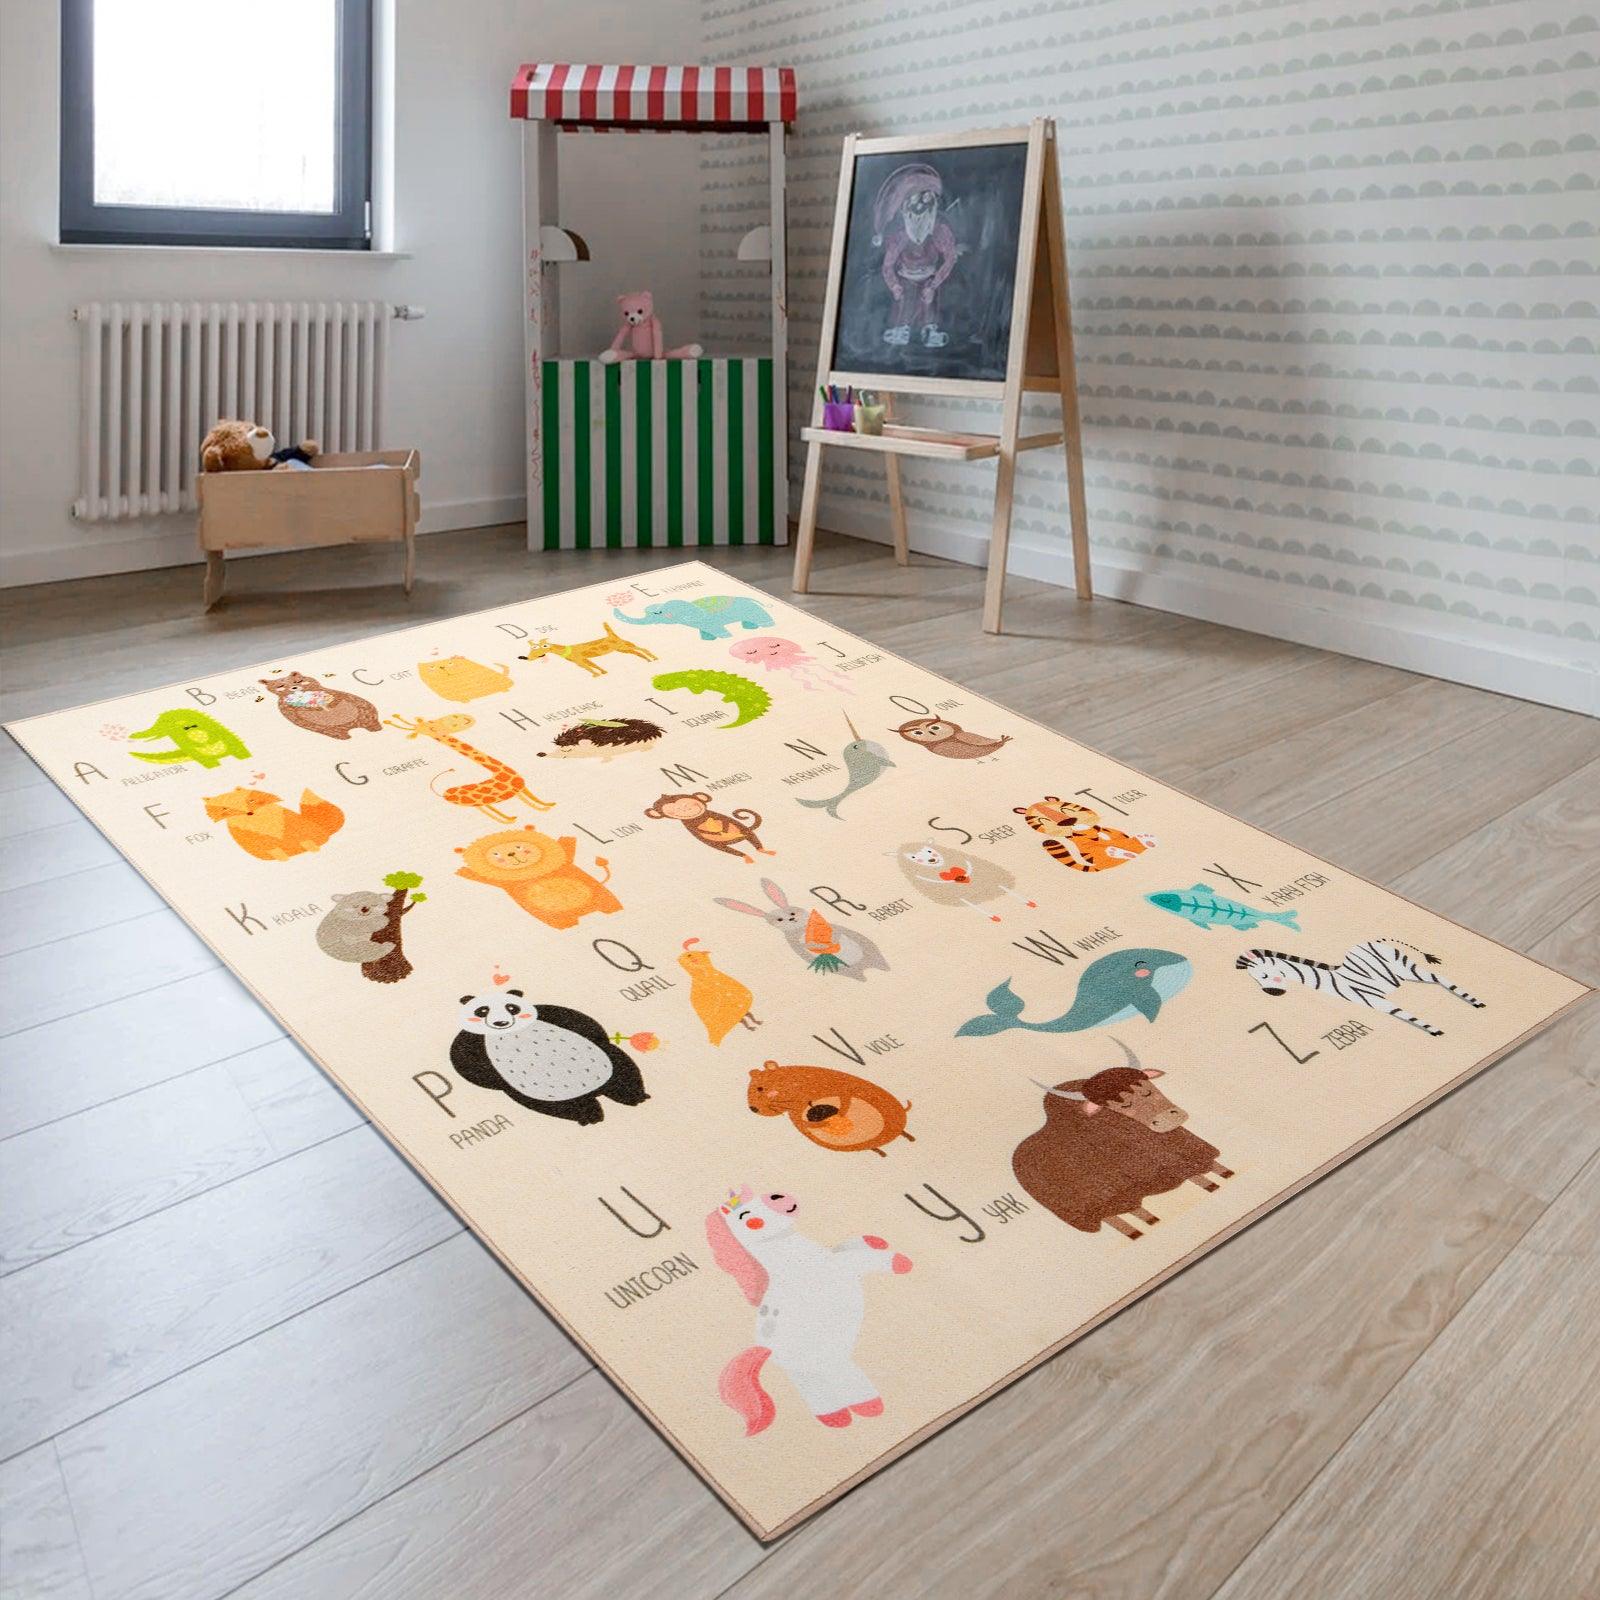 Booooom Jackson Collection ABC Fun Kids Rugs 59"x79"Numbers and Animal Educational Classroom Rug for Playroom Classroom and Kidroom Safety and Fun Alphabet Rug Learning Carpet for Boys and Girls 01